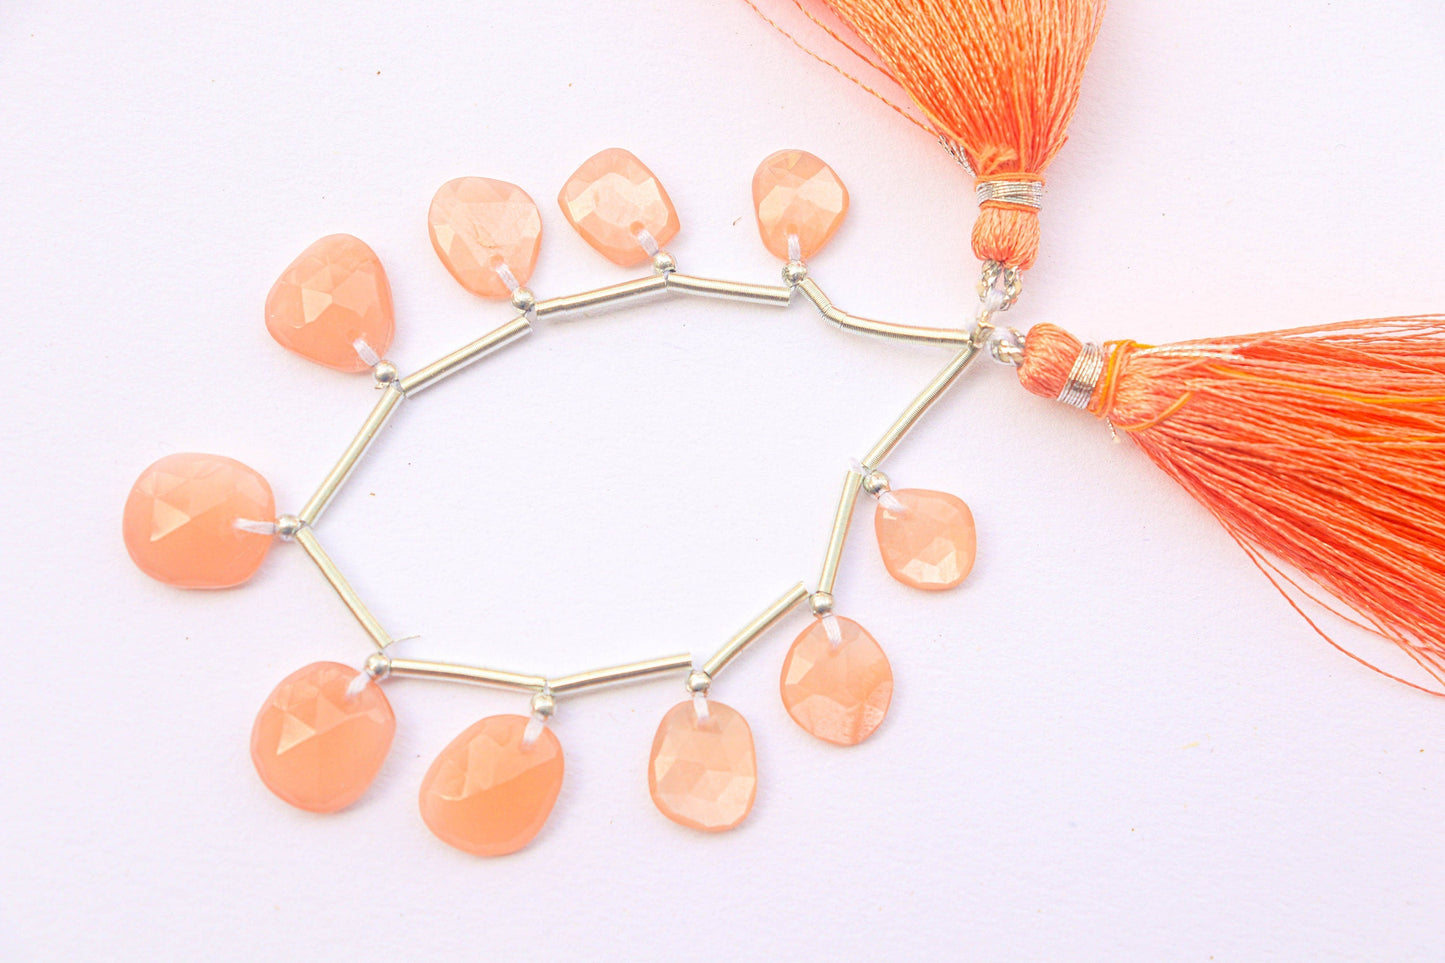 Peach Moonstone Faceted Uneven Shape Rose cut Briolette Beads, Natural Moonstone Gemstone Beads, 12 Pieces, 7x8mm to 12x13mm Beadsforyourjewelry